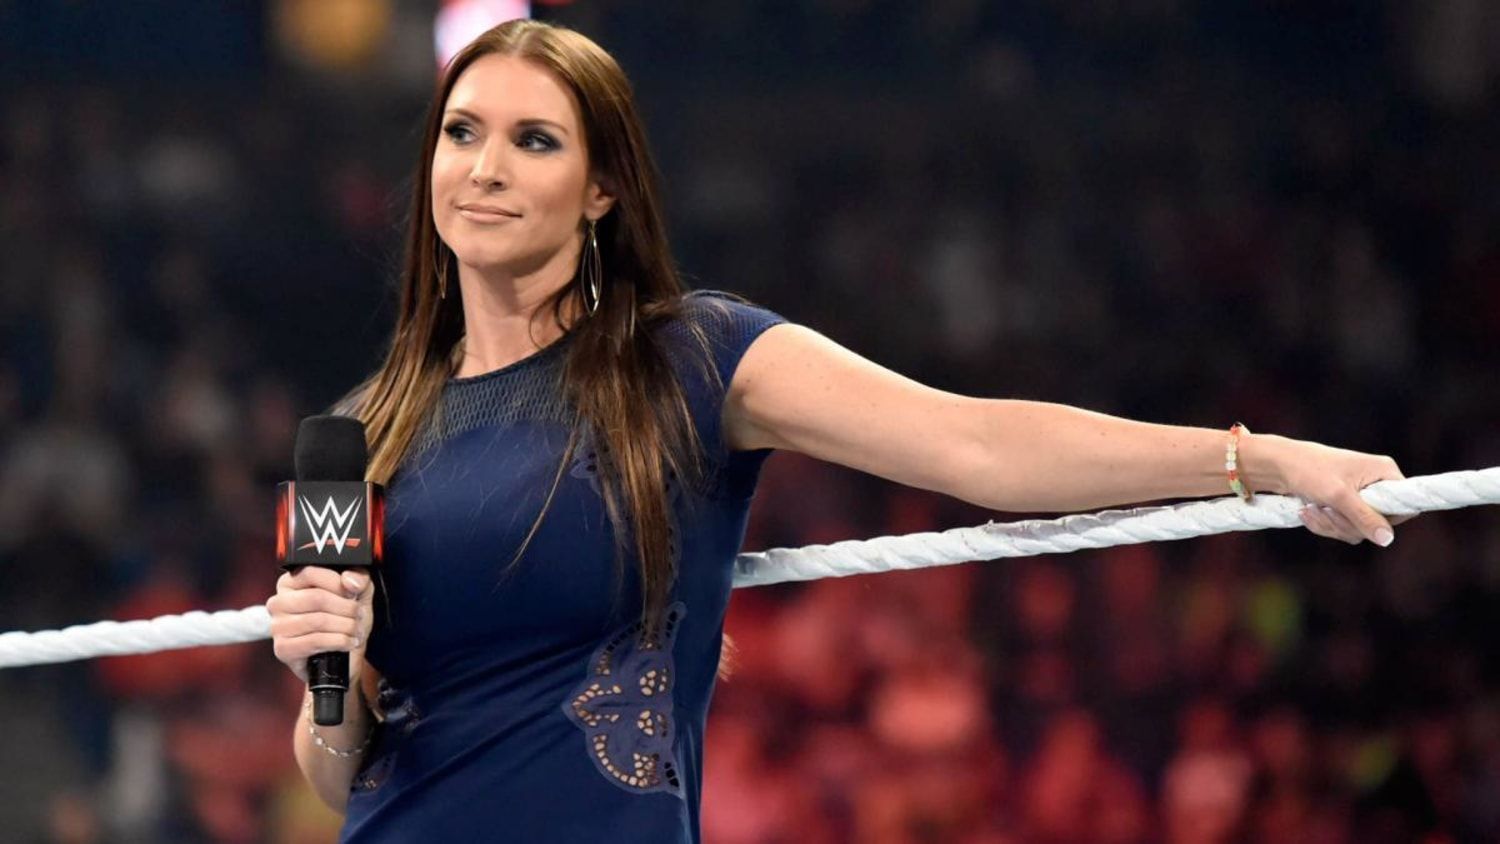 Stephanie McMahon is the chief brand officer of WWE